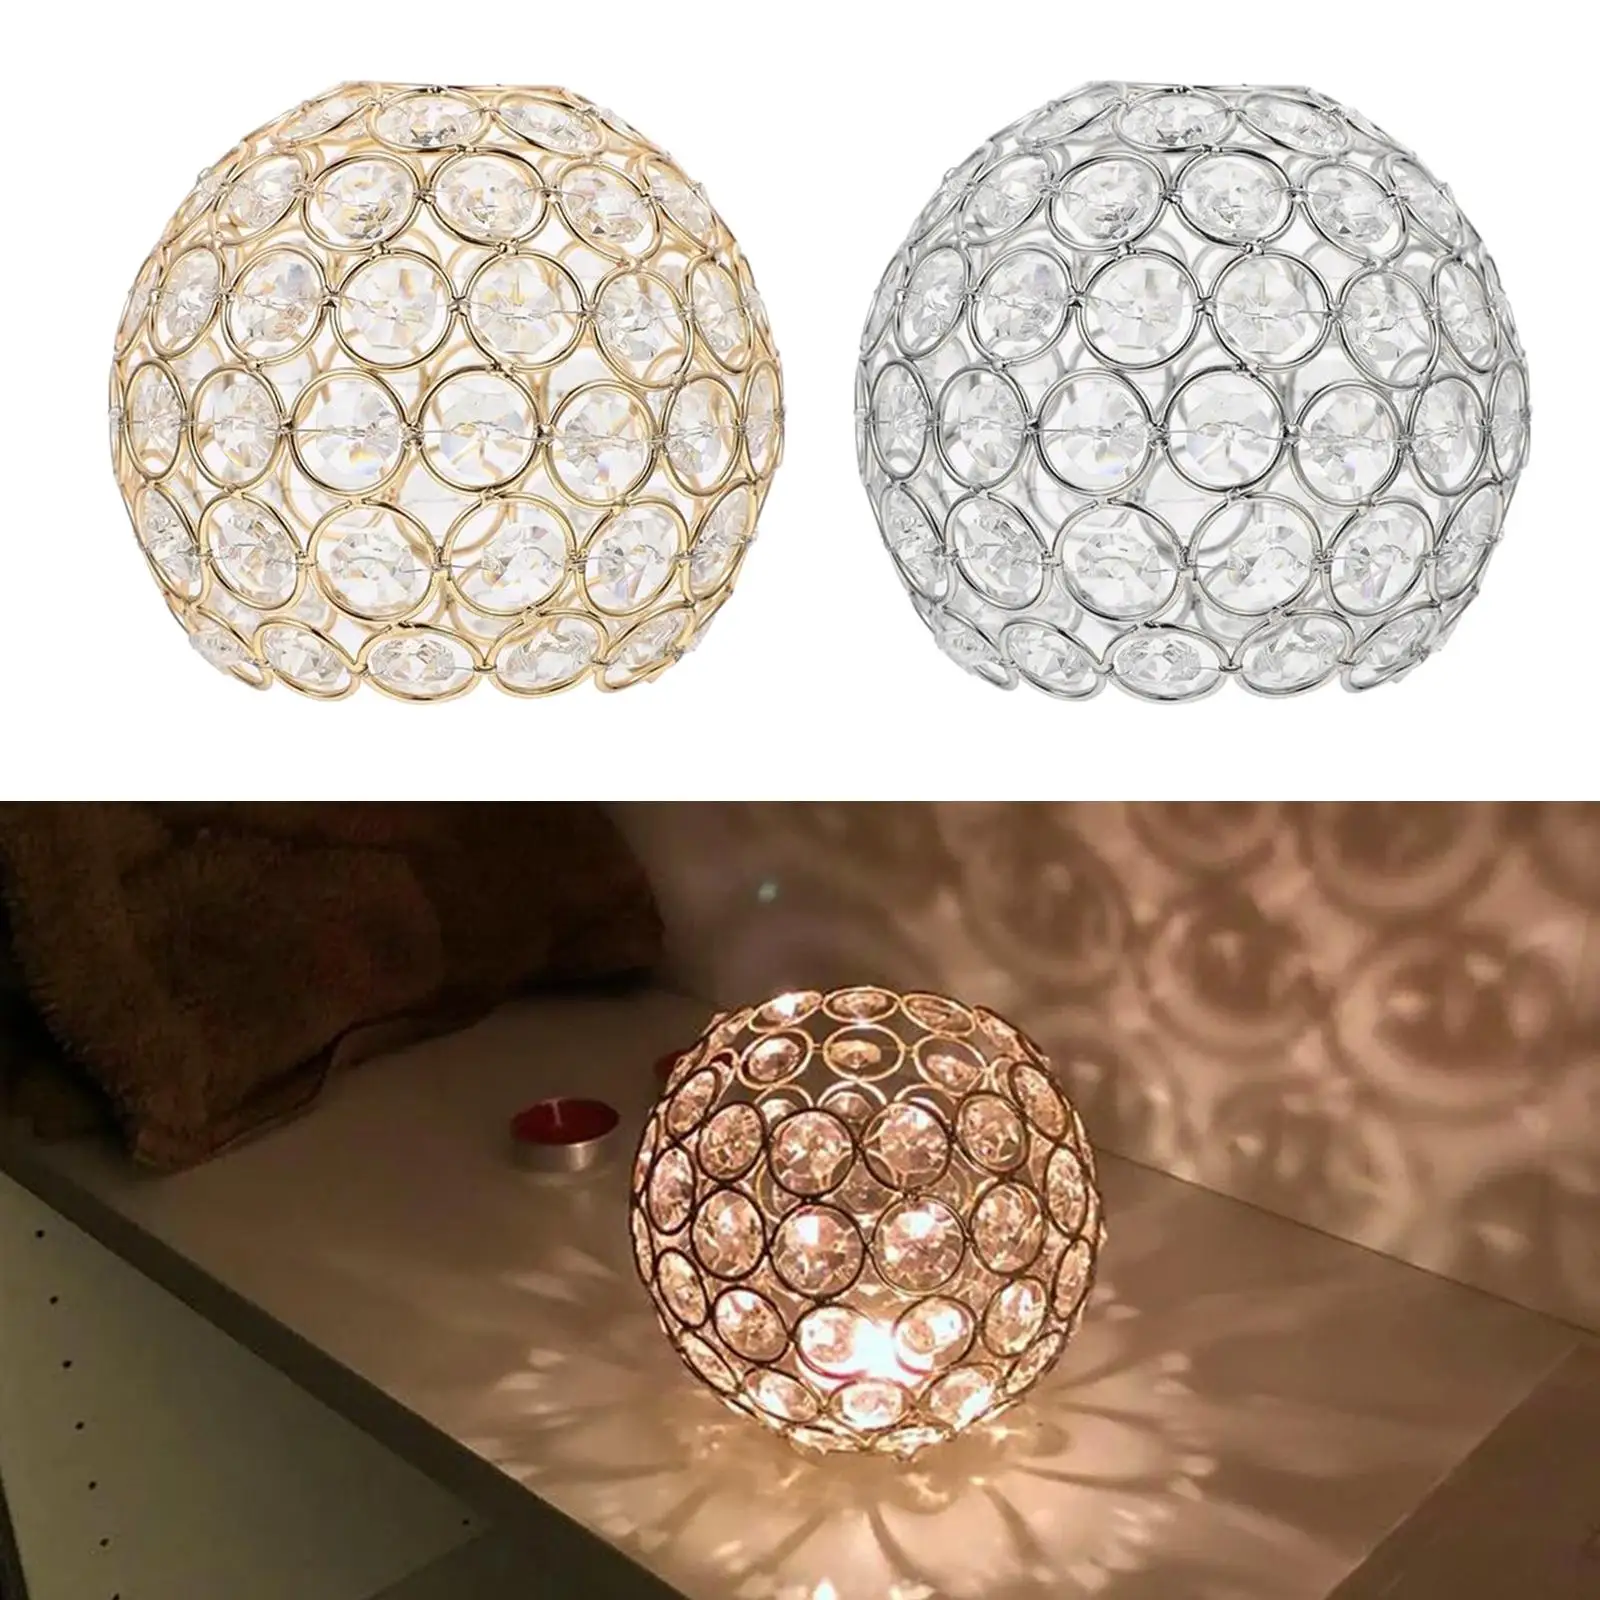 Ceiling Light Shade Replacement Cover Bathroom College Crystal Lampshade